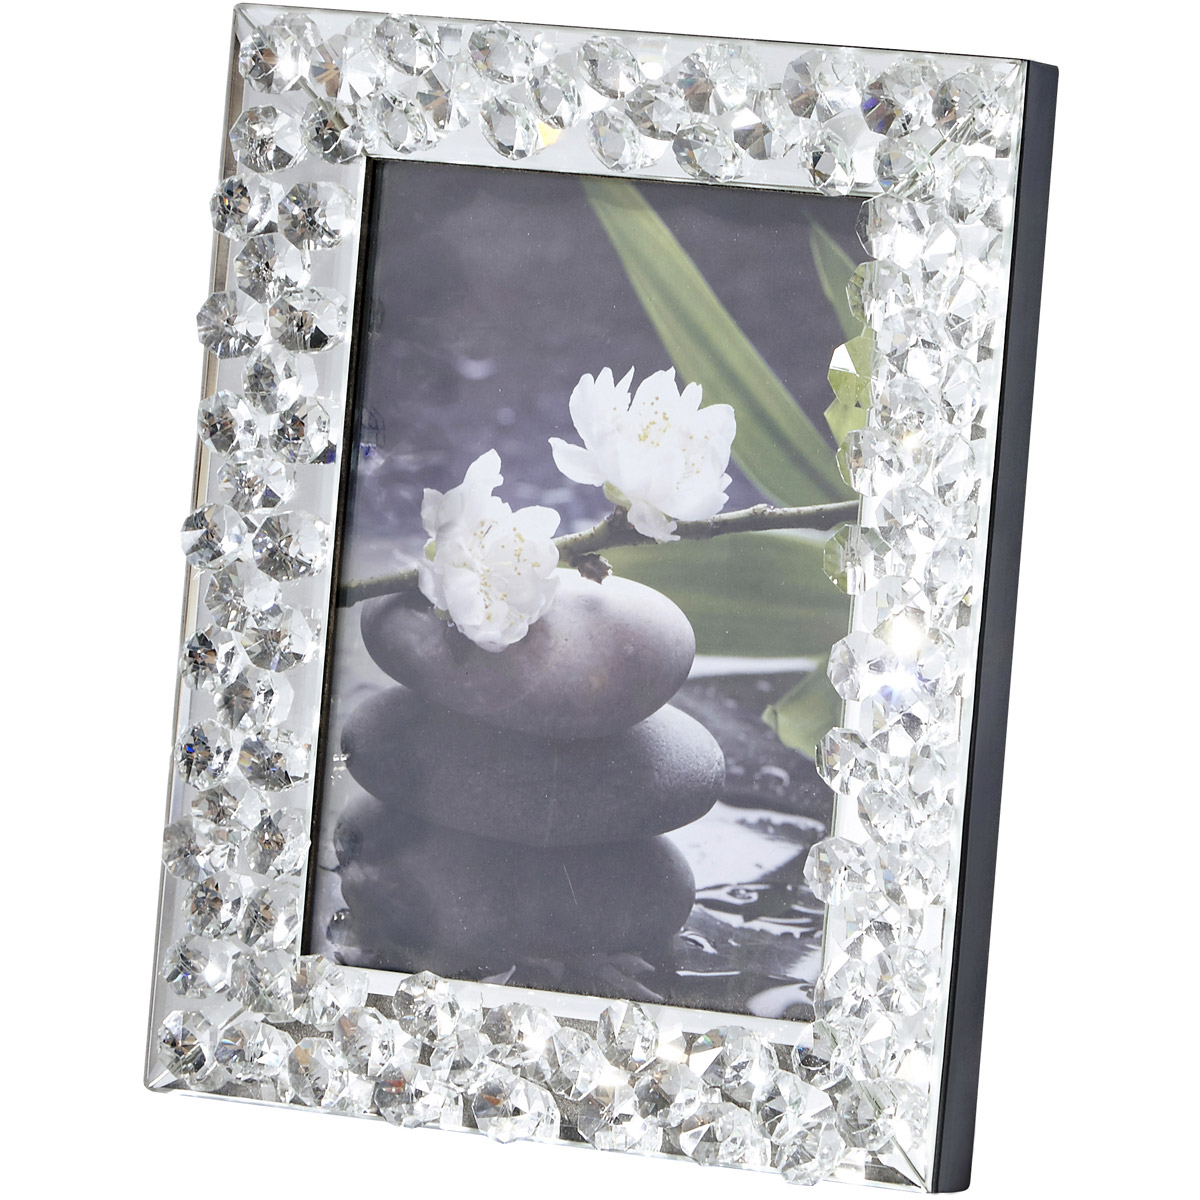 Mr9106 Sparkle 8 In. Contemporary Crystal Photo Frame, Clear